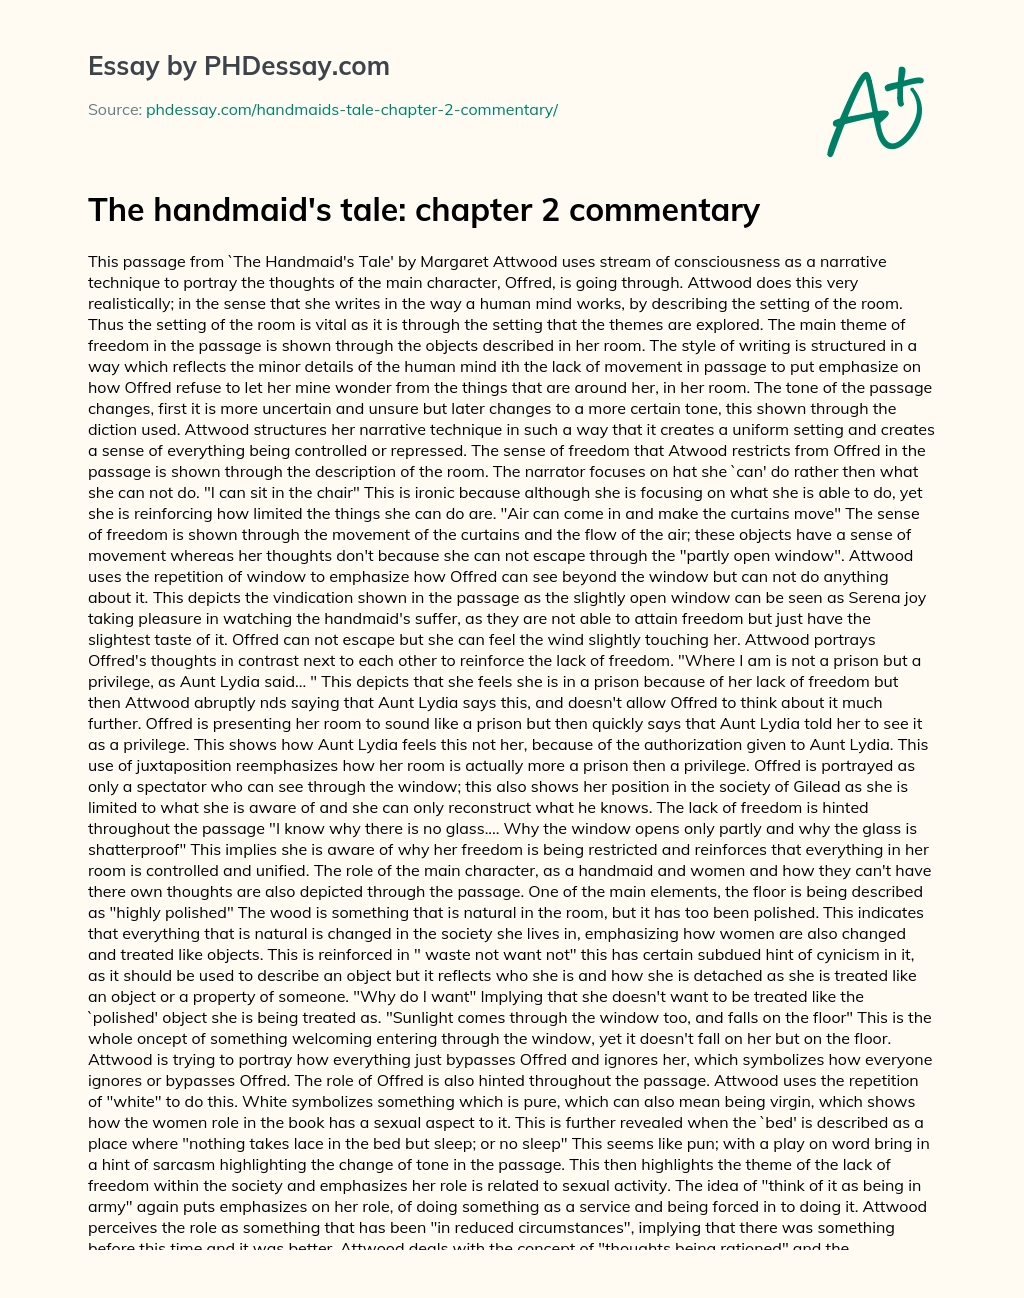 The handmaid’s tale: chapter 2 commentary essay